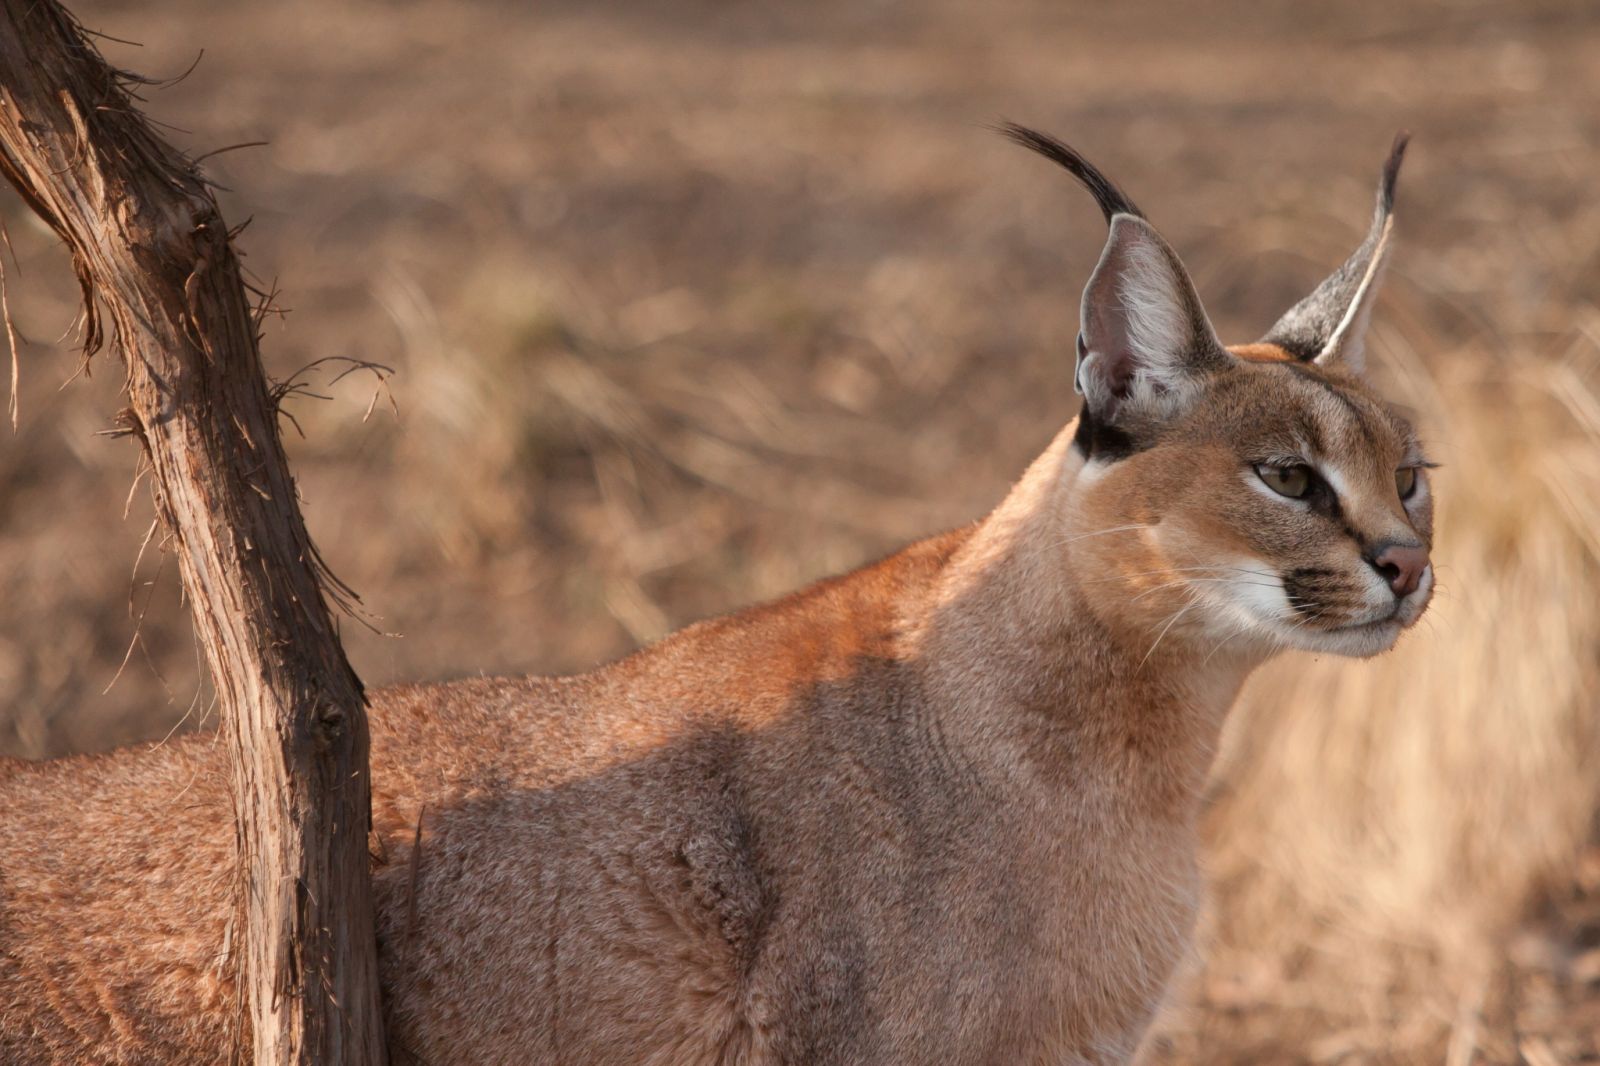 Photo caracal in nature